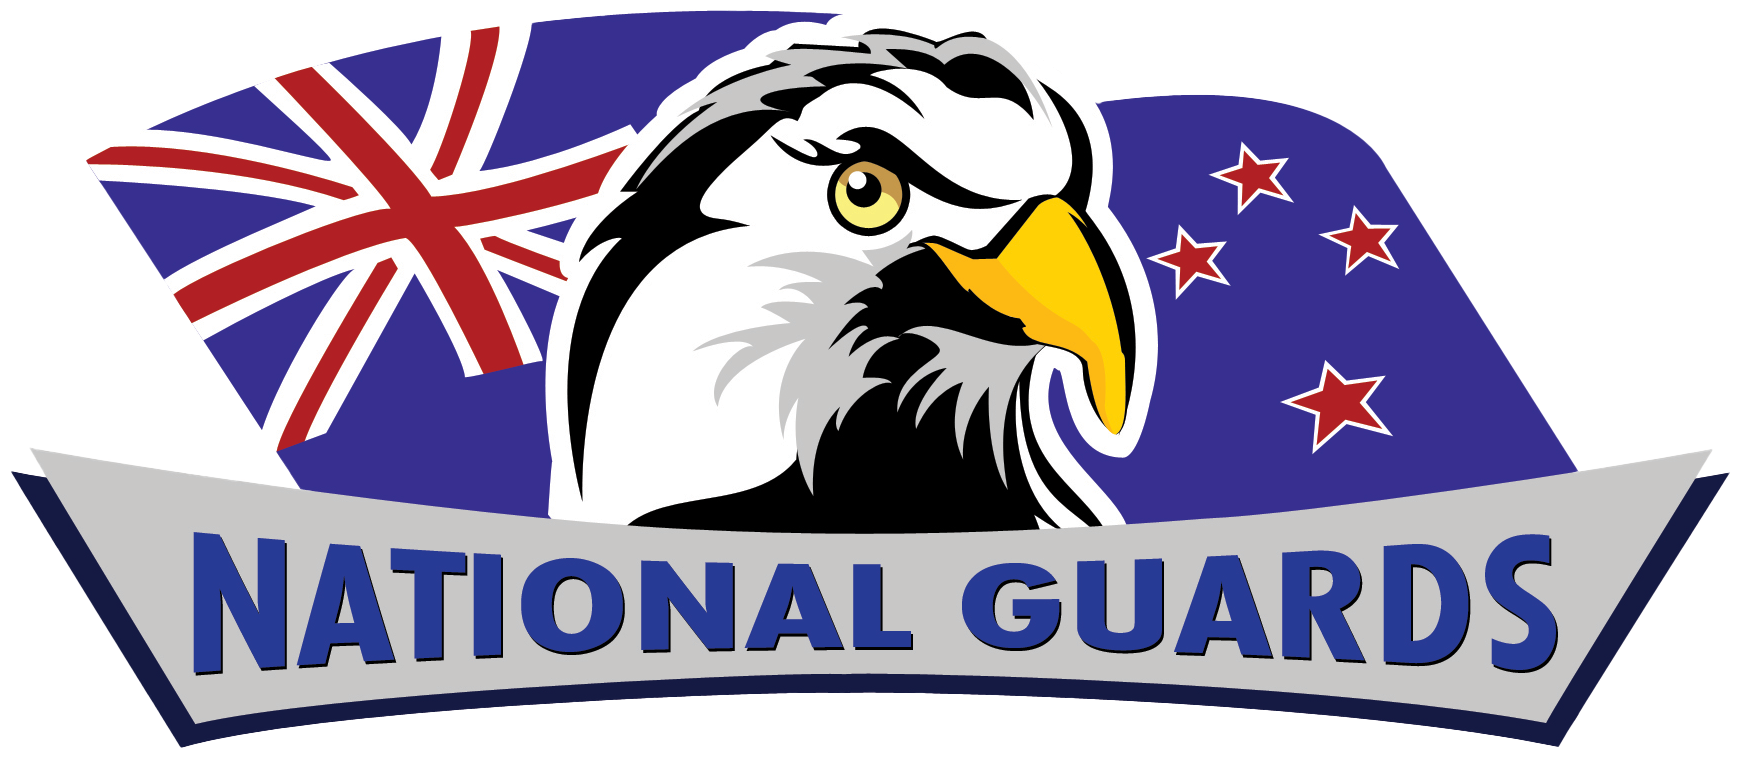 National Guards